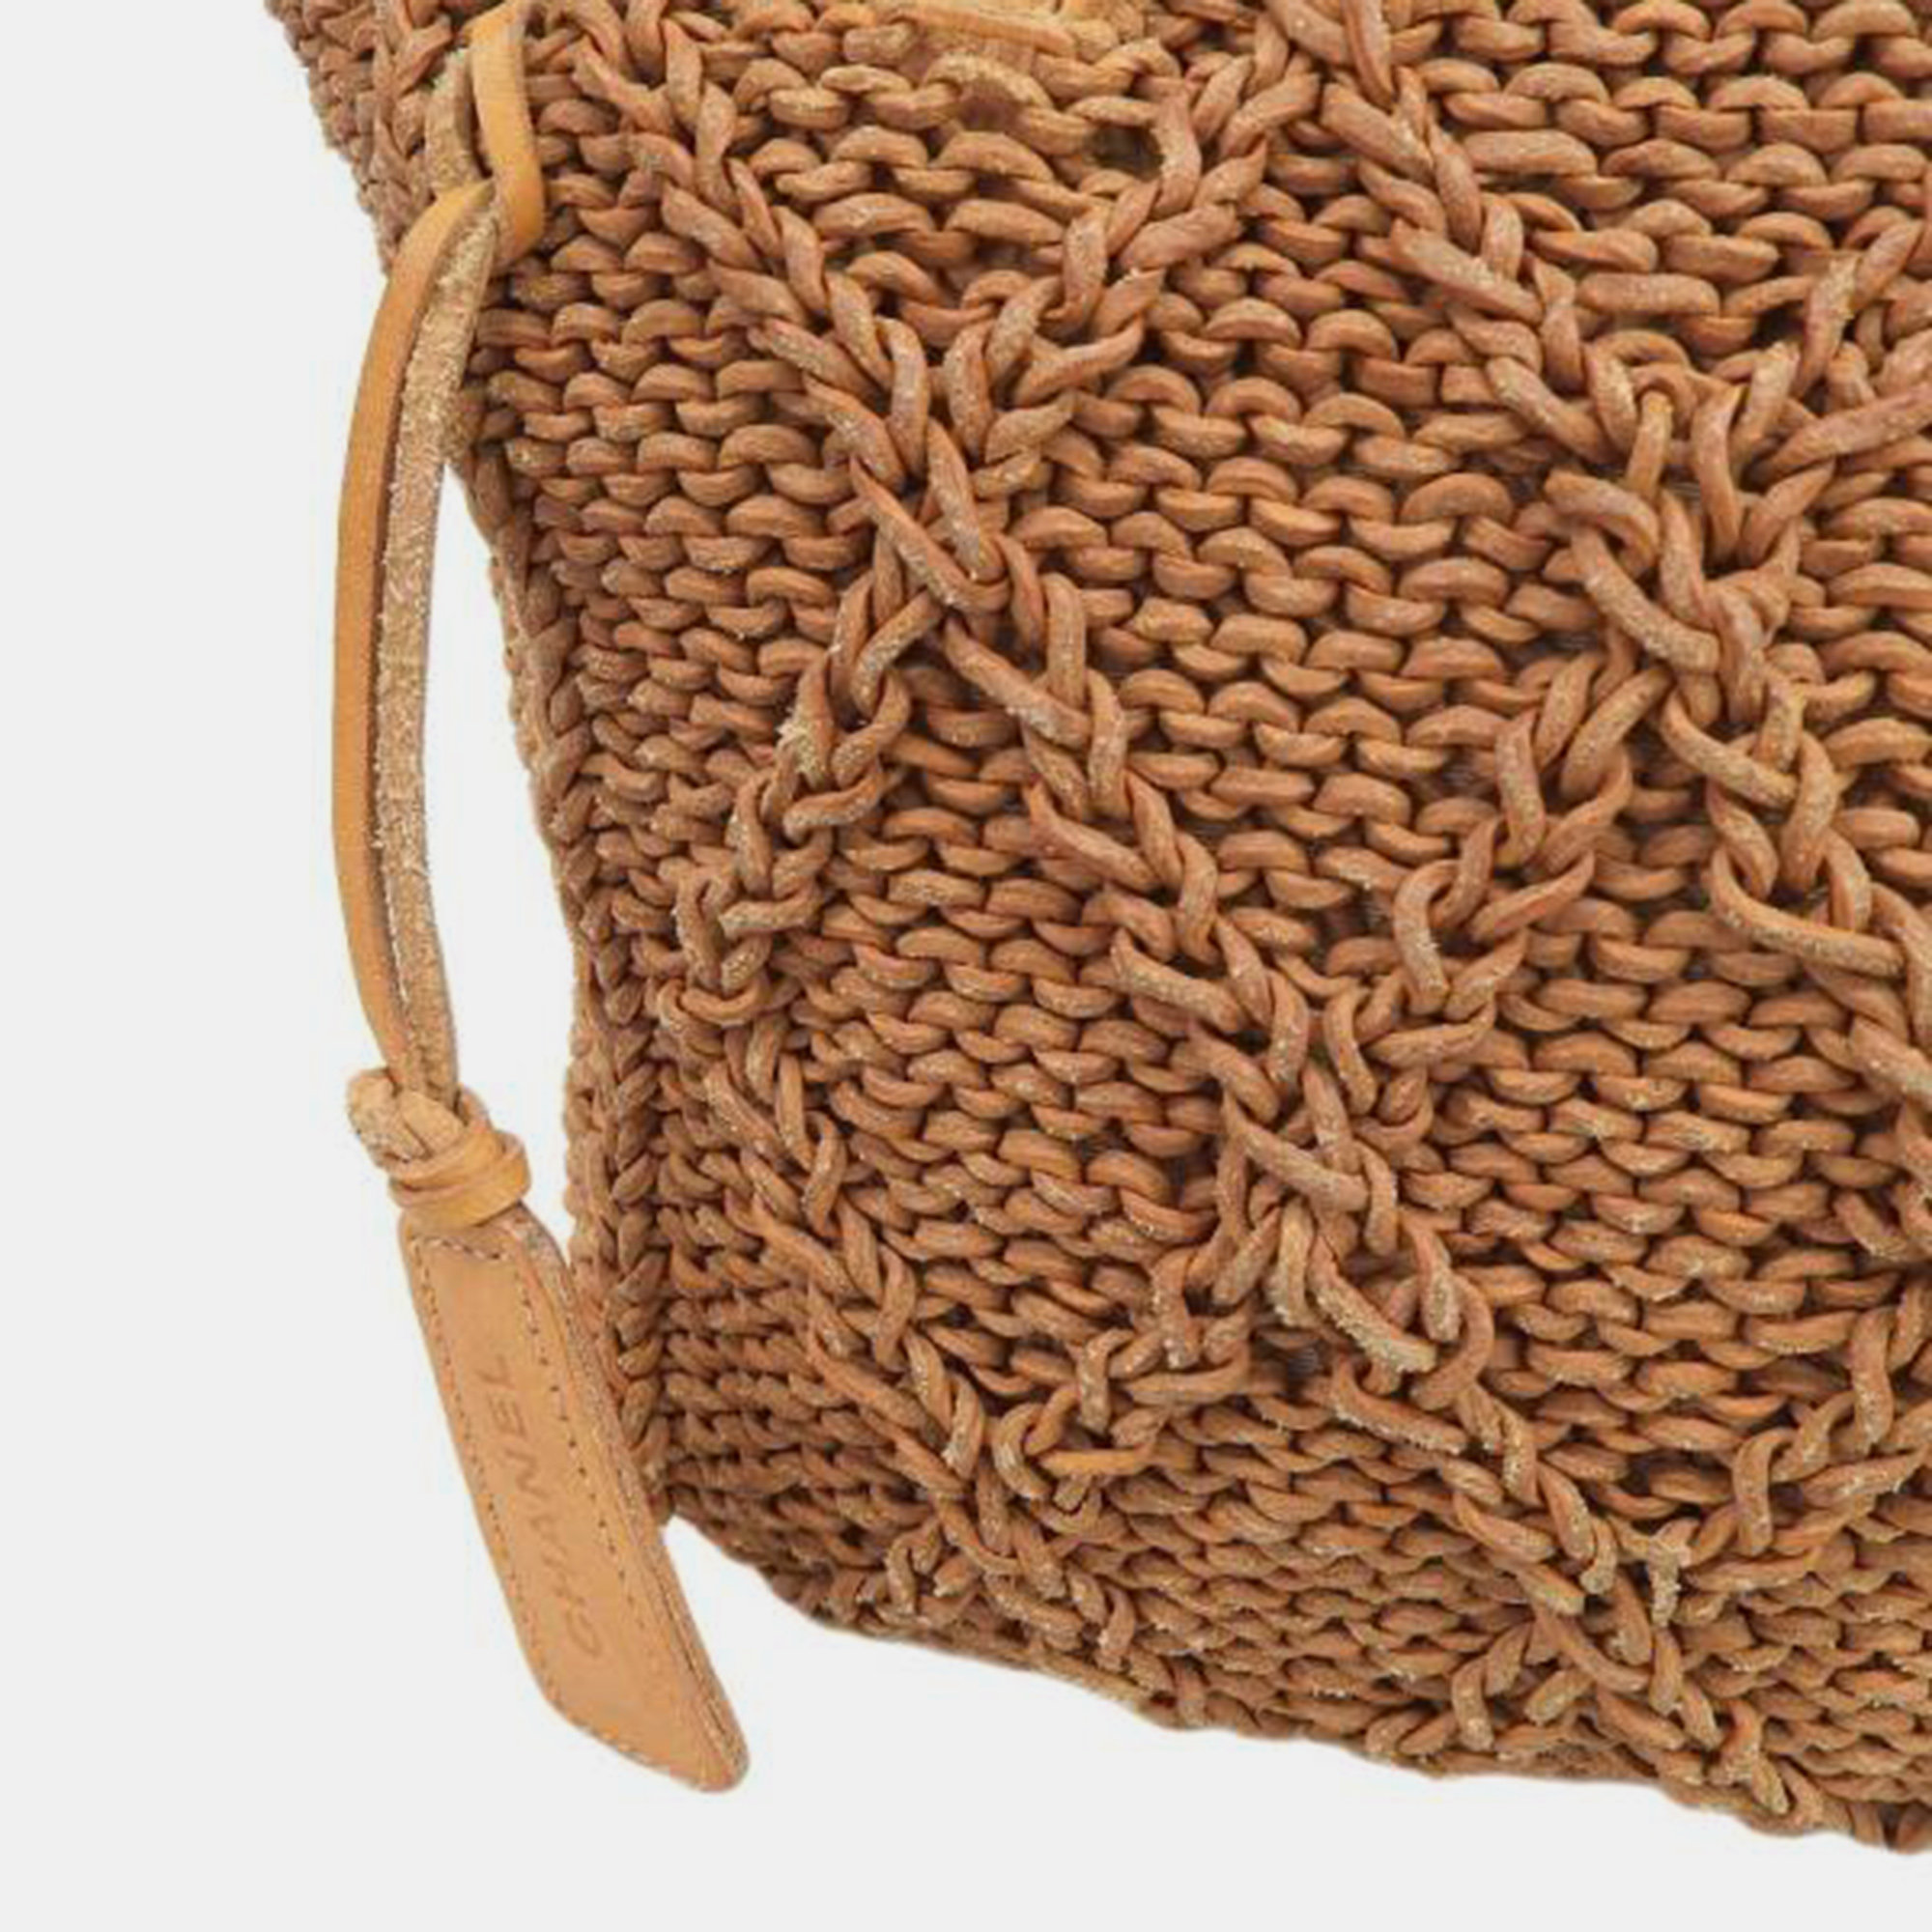 Chanel Brown Woven Leather Tote Bag